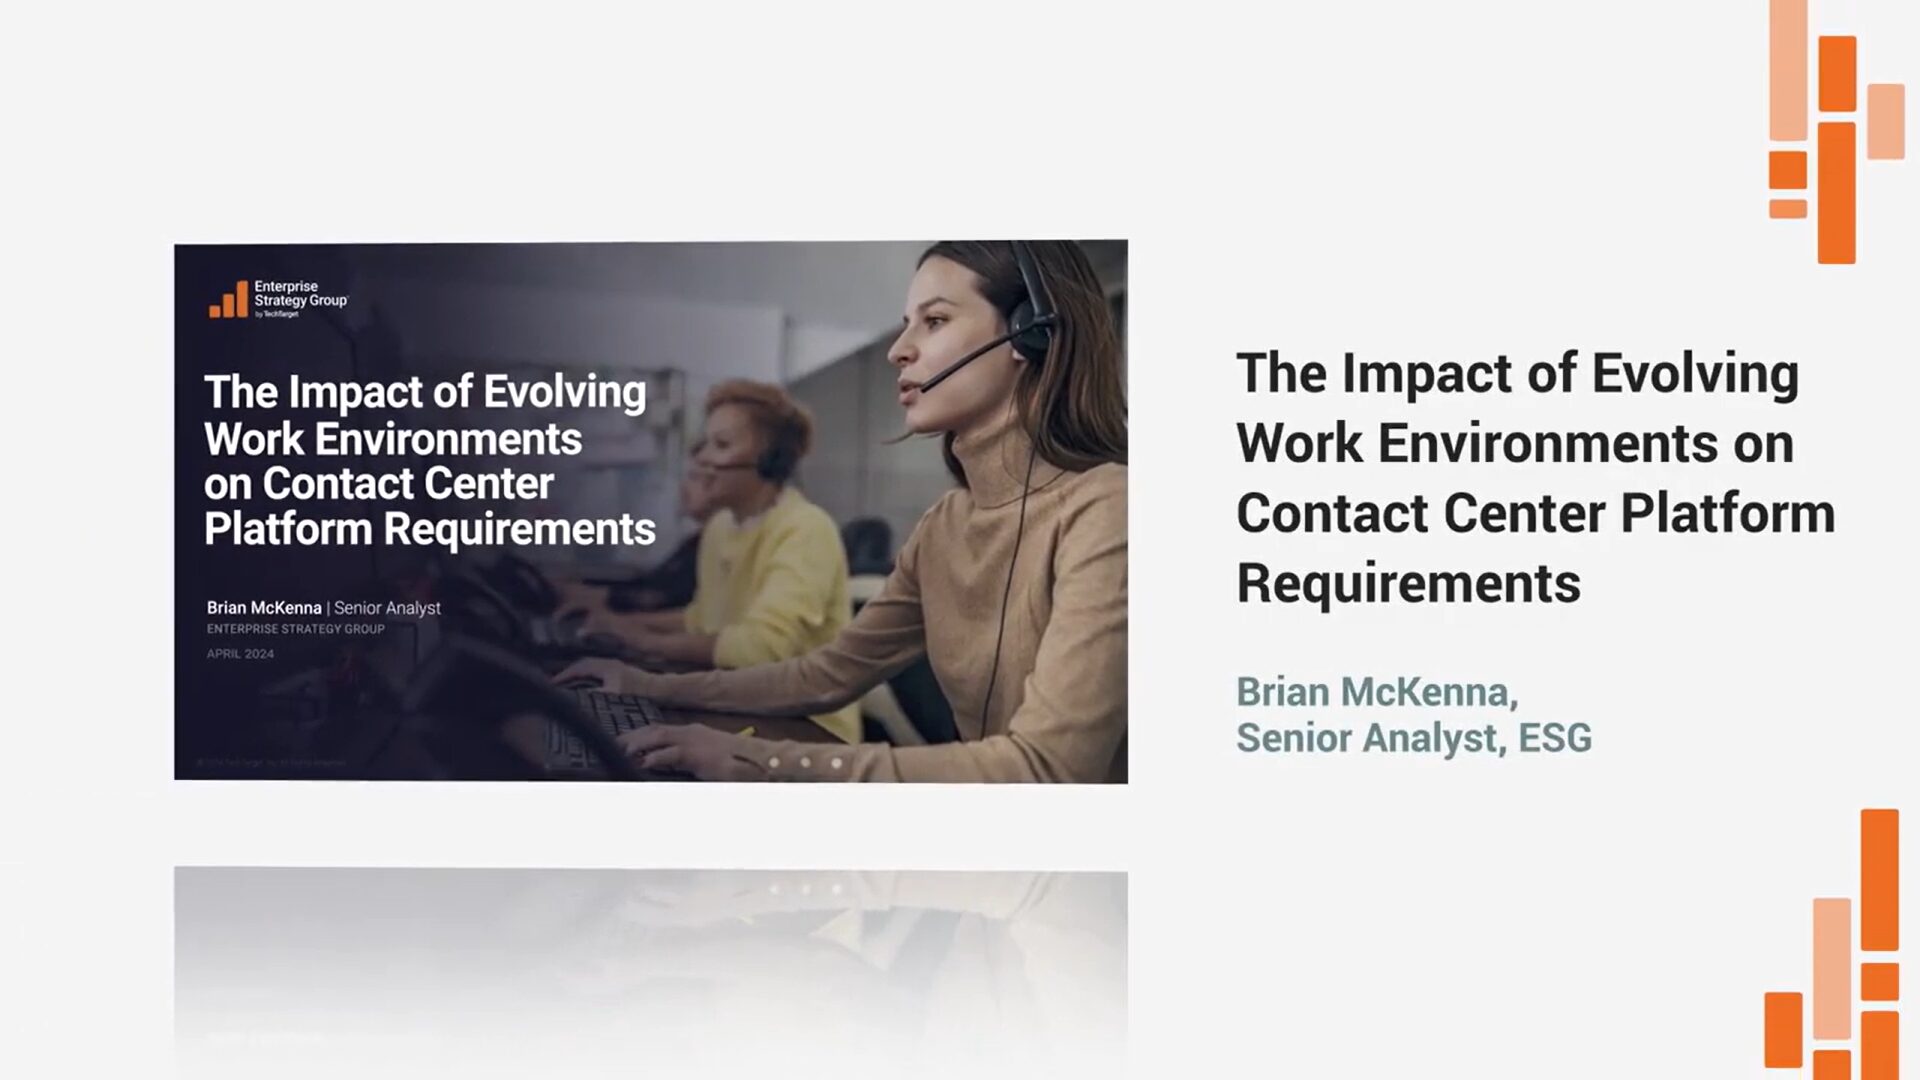 The Impact of Evolving Work Environments on Contact Center Platform Requirements